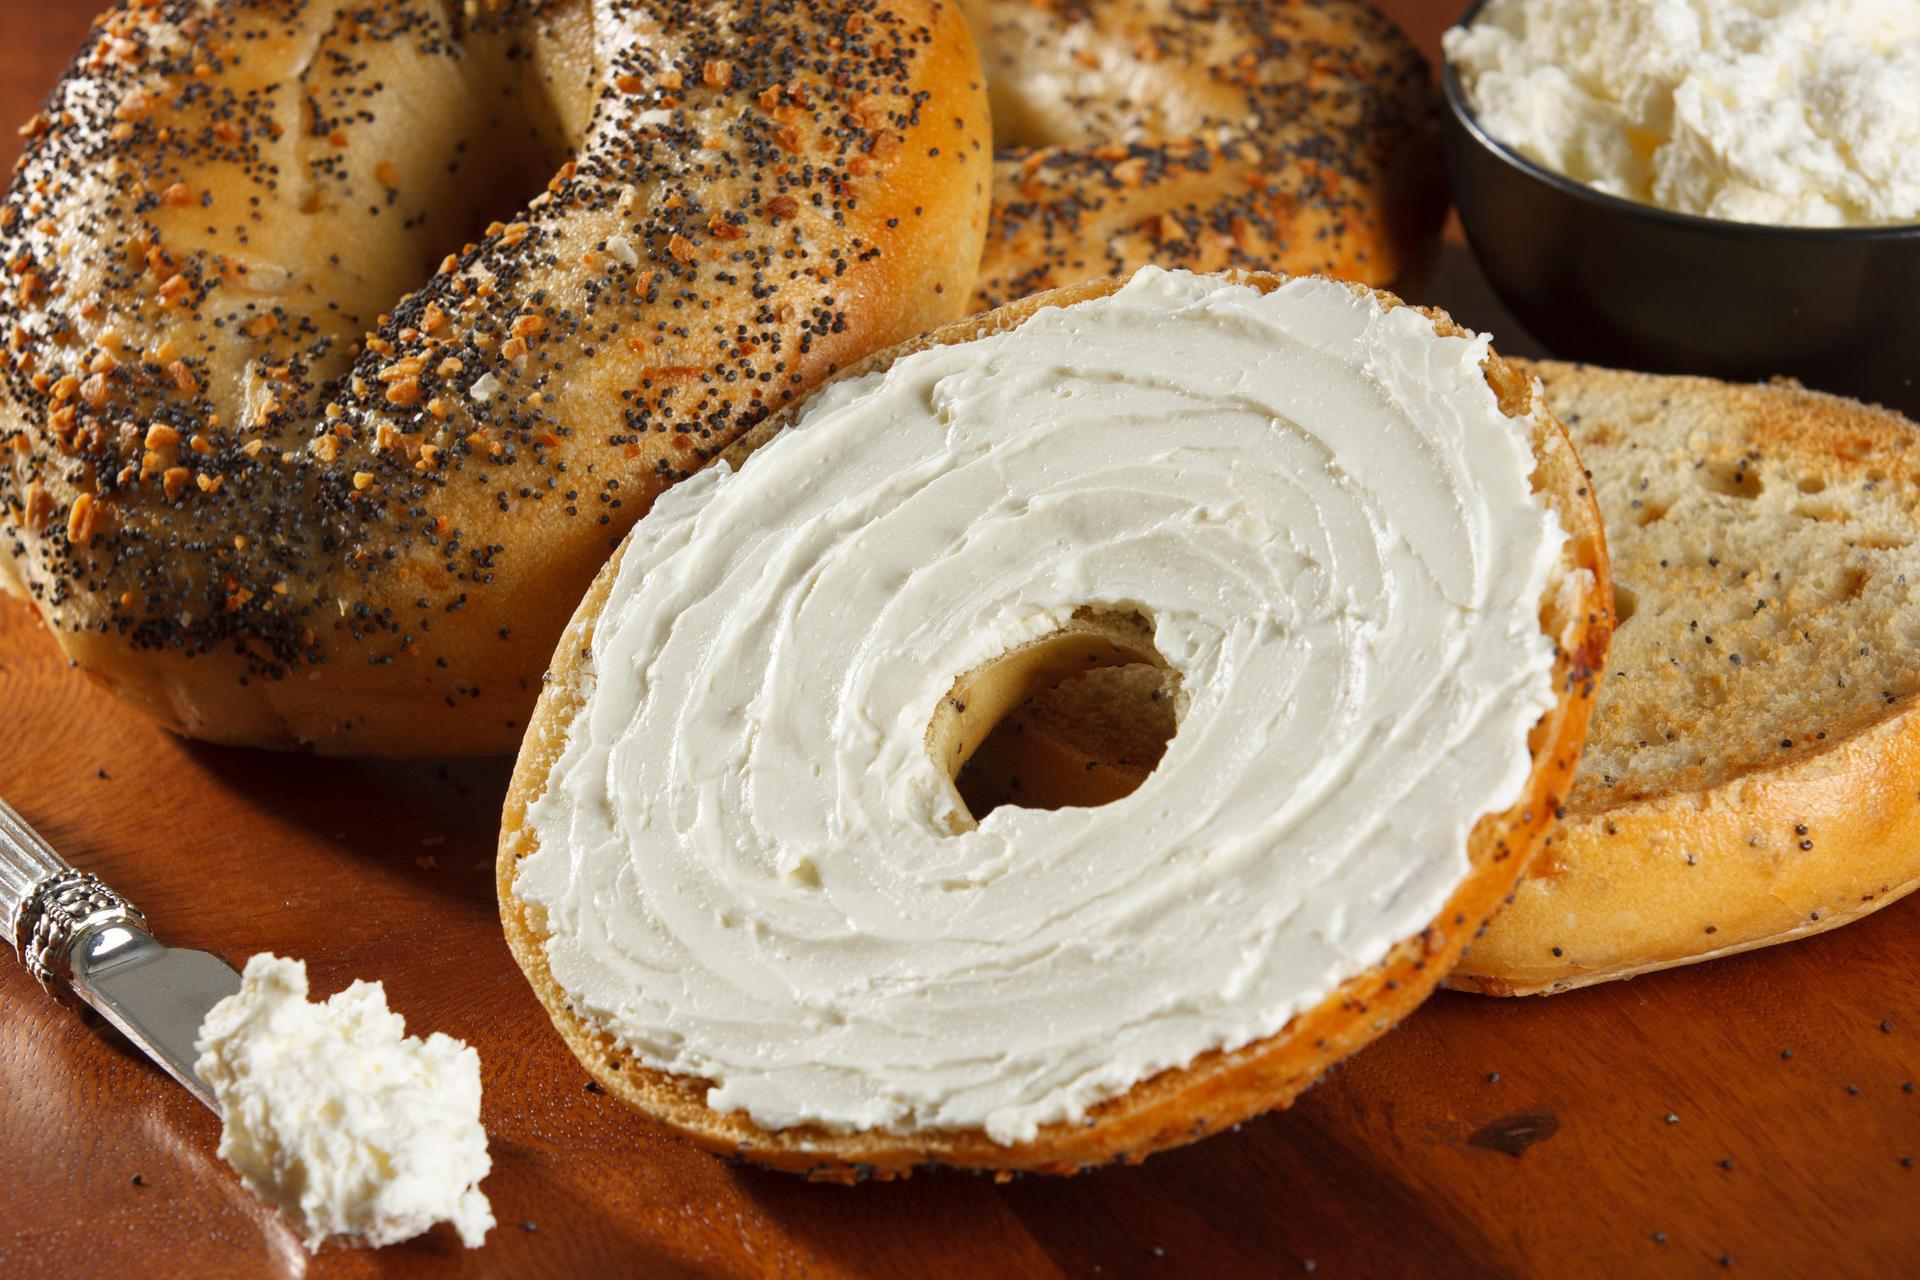 New Mom Claims Poppyseed Bagel Caused Positive Drug Test - featured